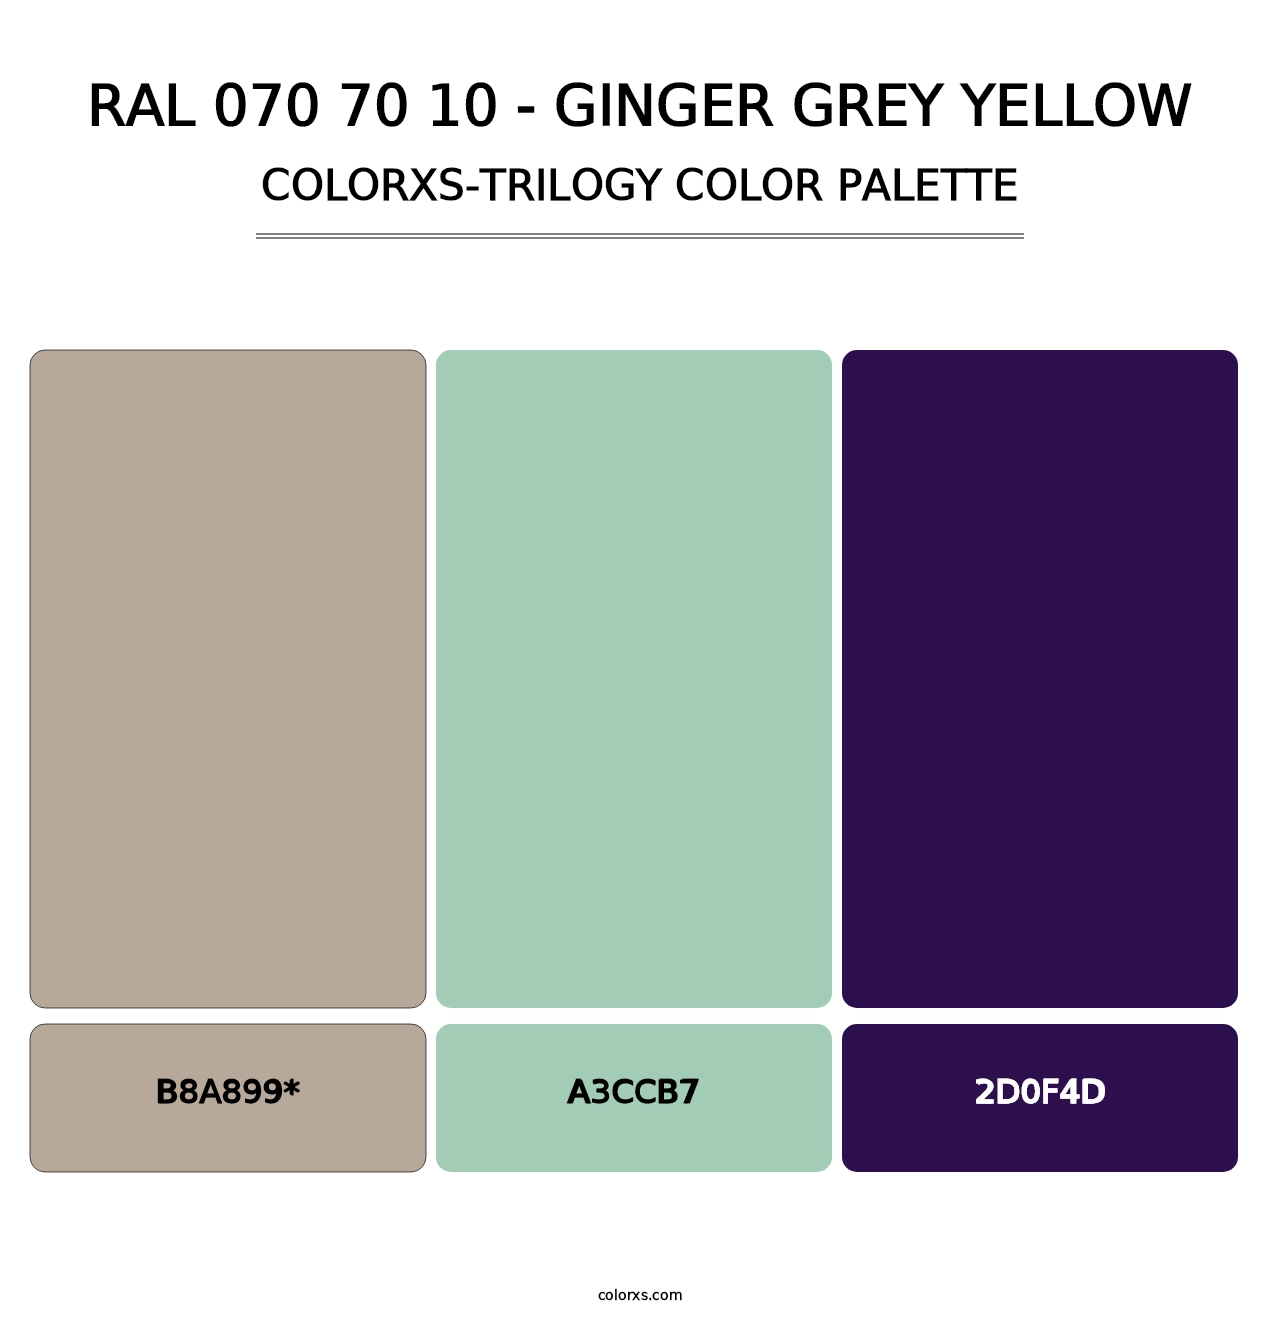 RAL 070 70 10 - Ginger Grey Yellow - Colorxs Trilogy Palette